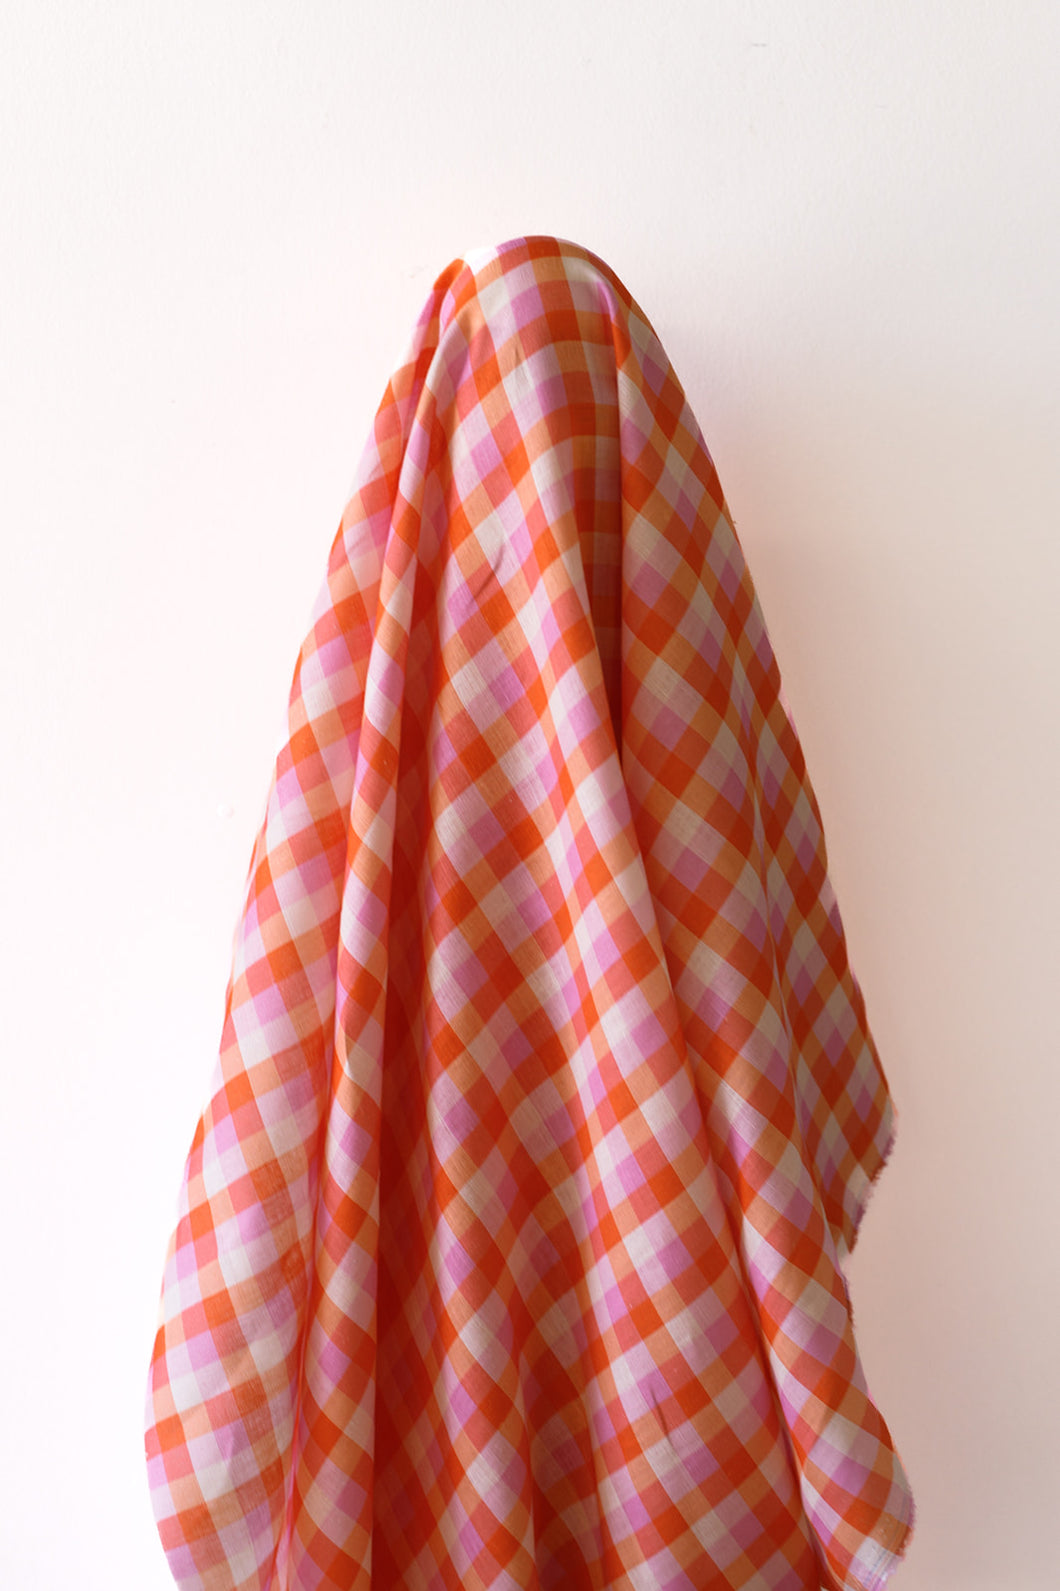 Summer Vibes 100% Linen Gingham 138 cm wide $38 pm